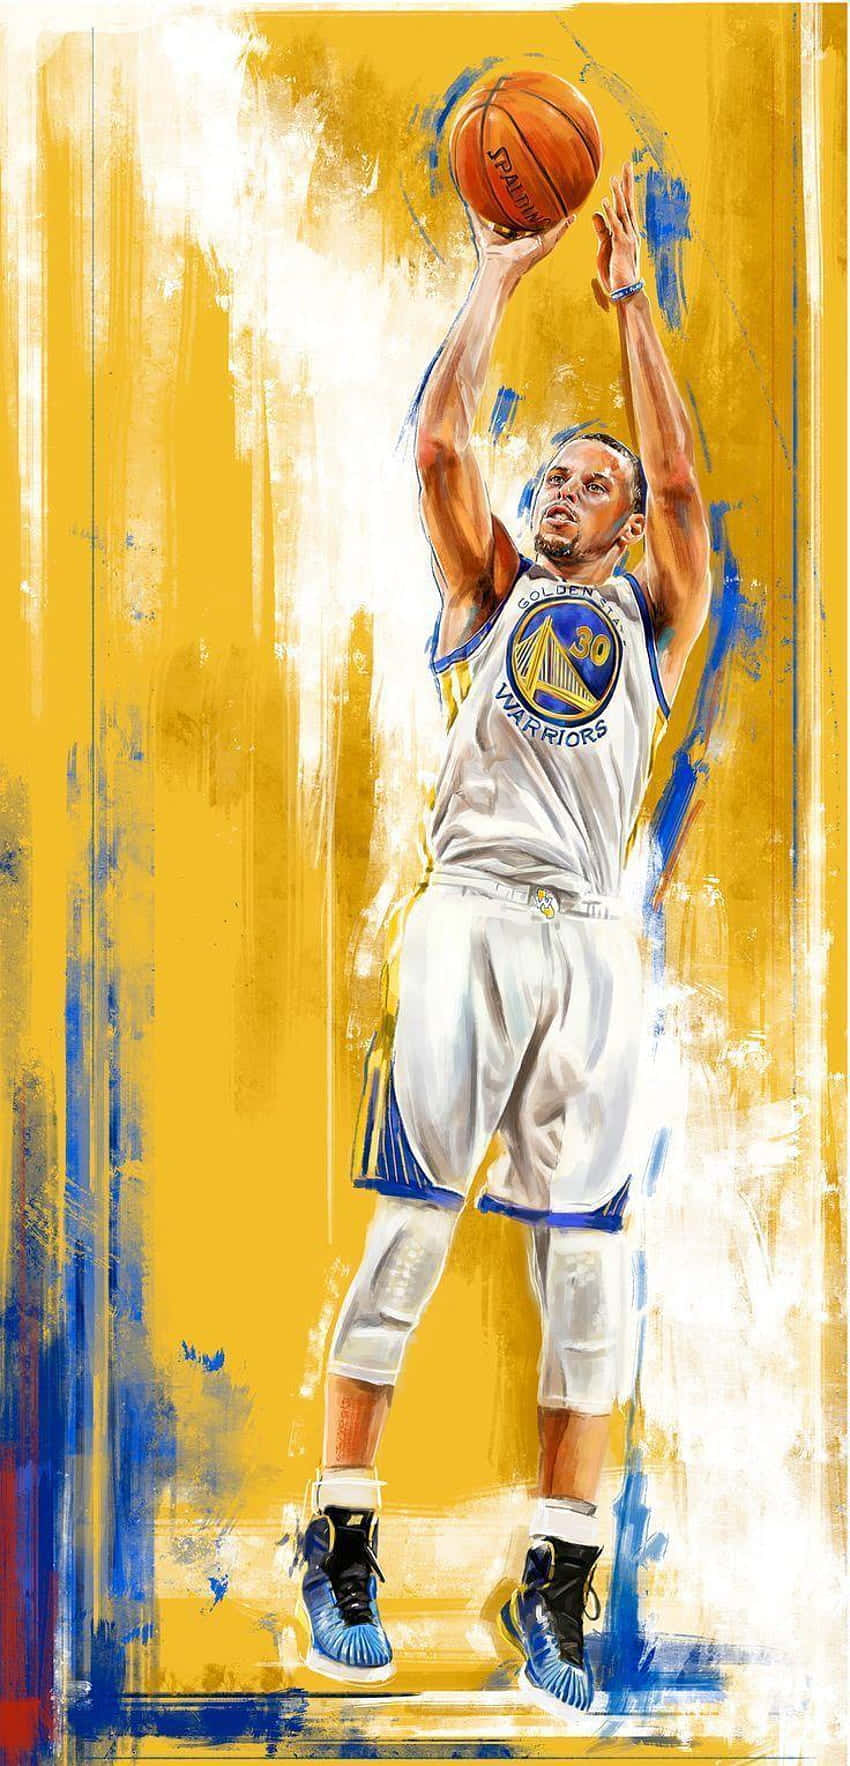 Stephen Curry, ready and willing to play! Wallpaper